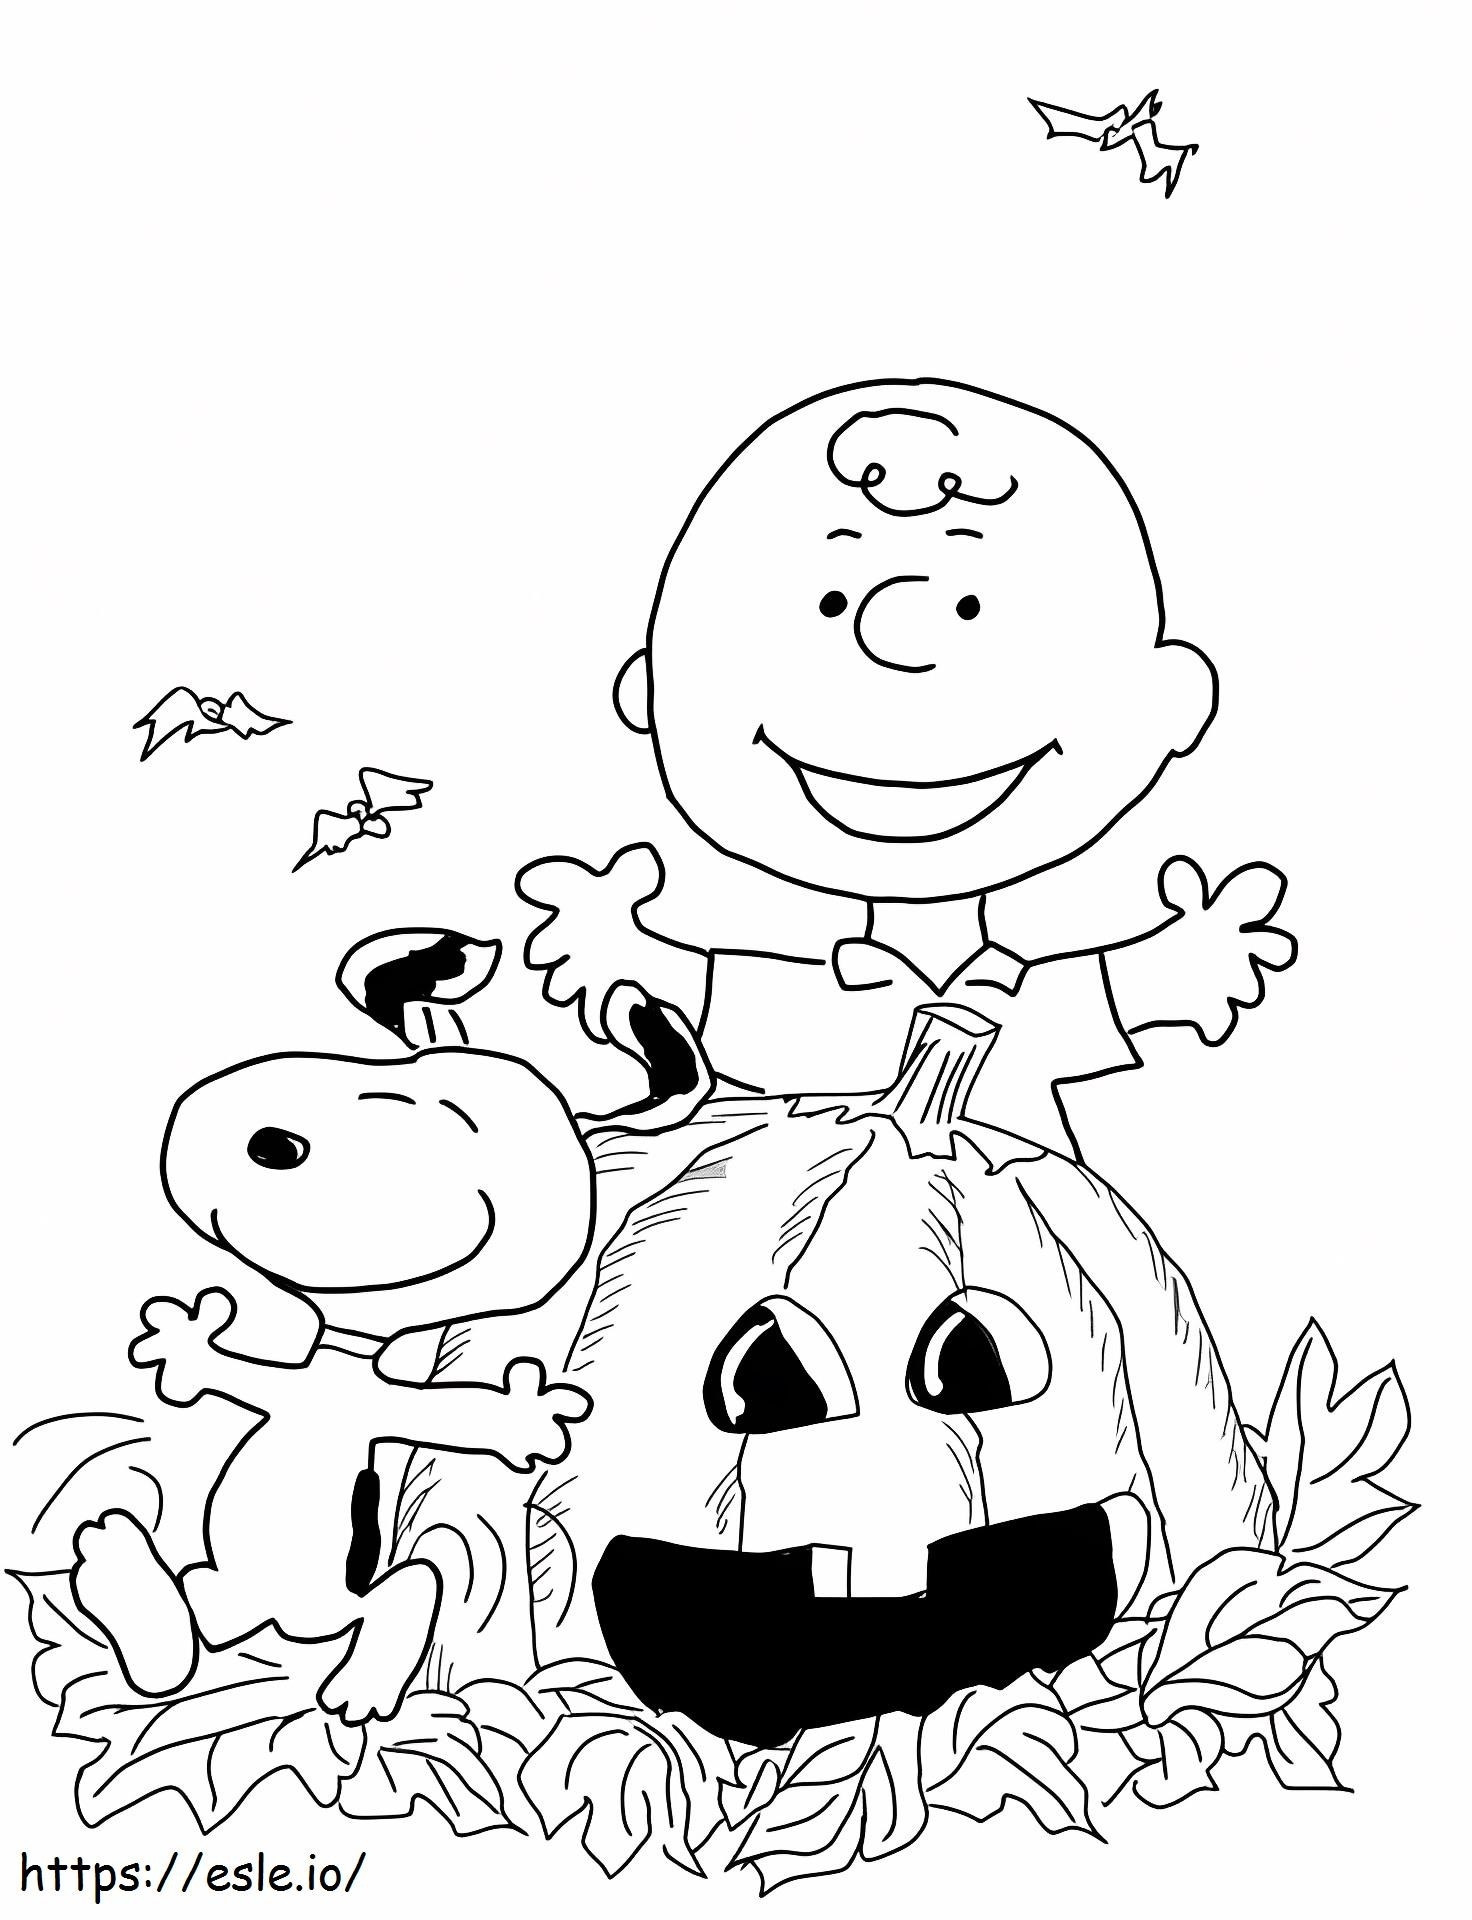 Charlie Brown Halloween coloring page